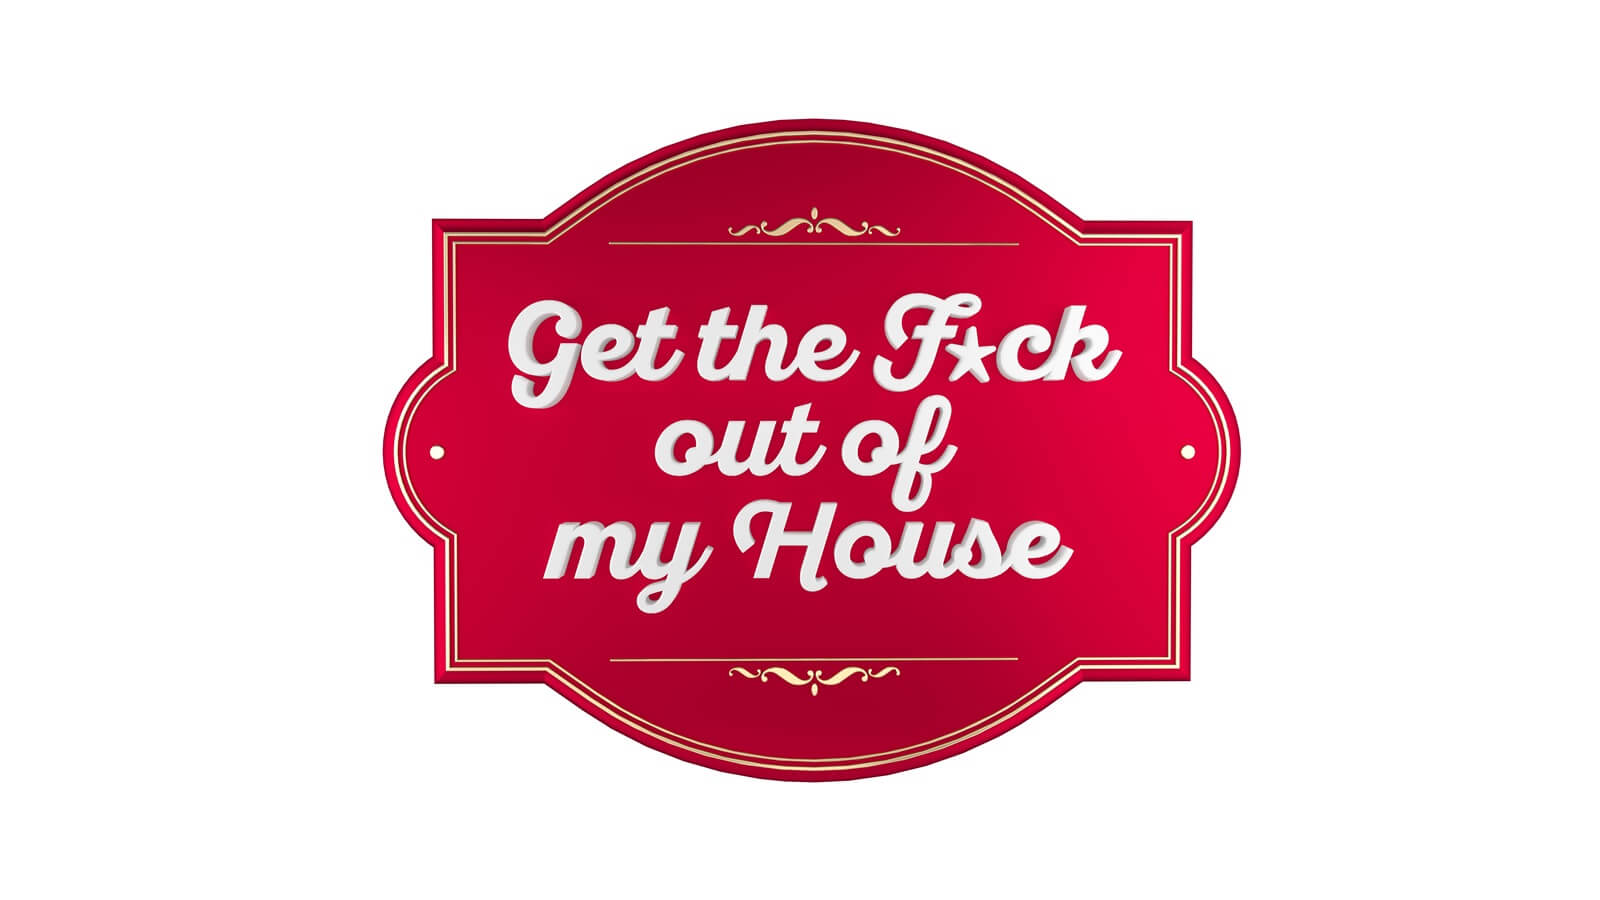 Get the F*ck out of my House